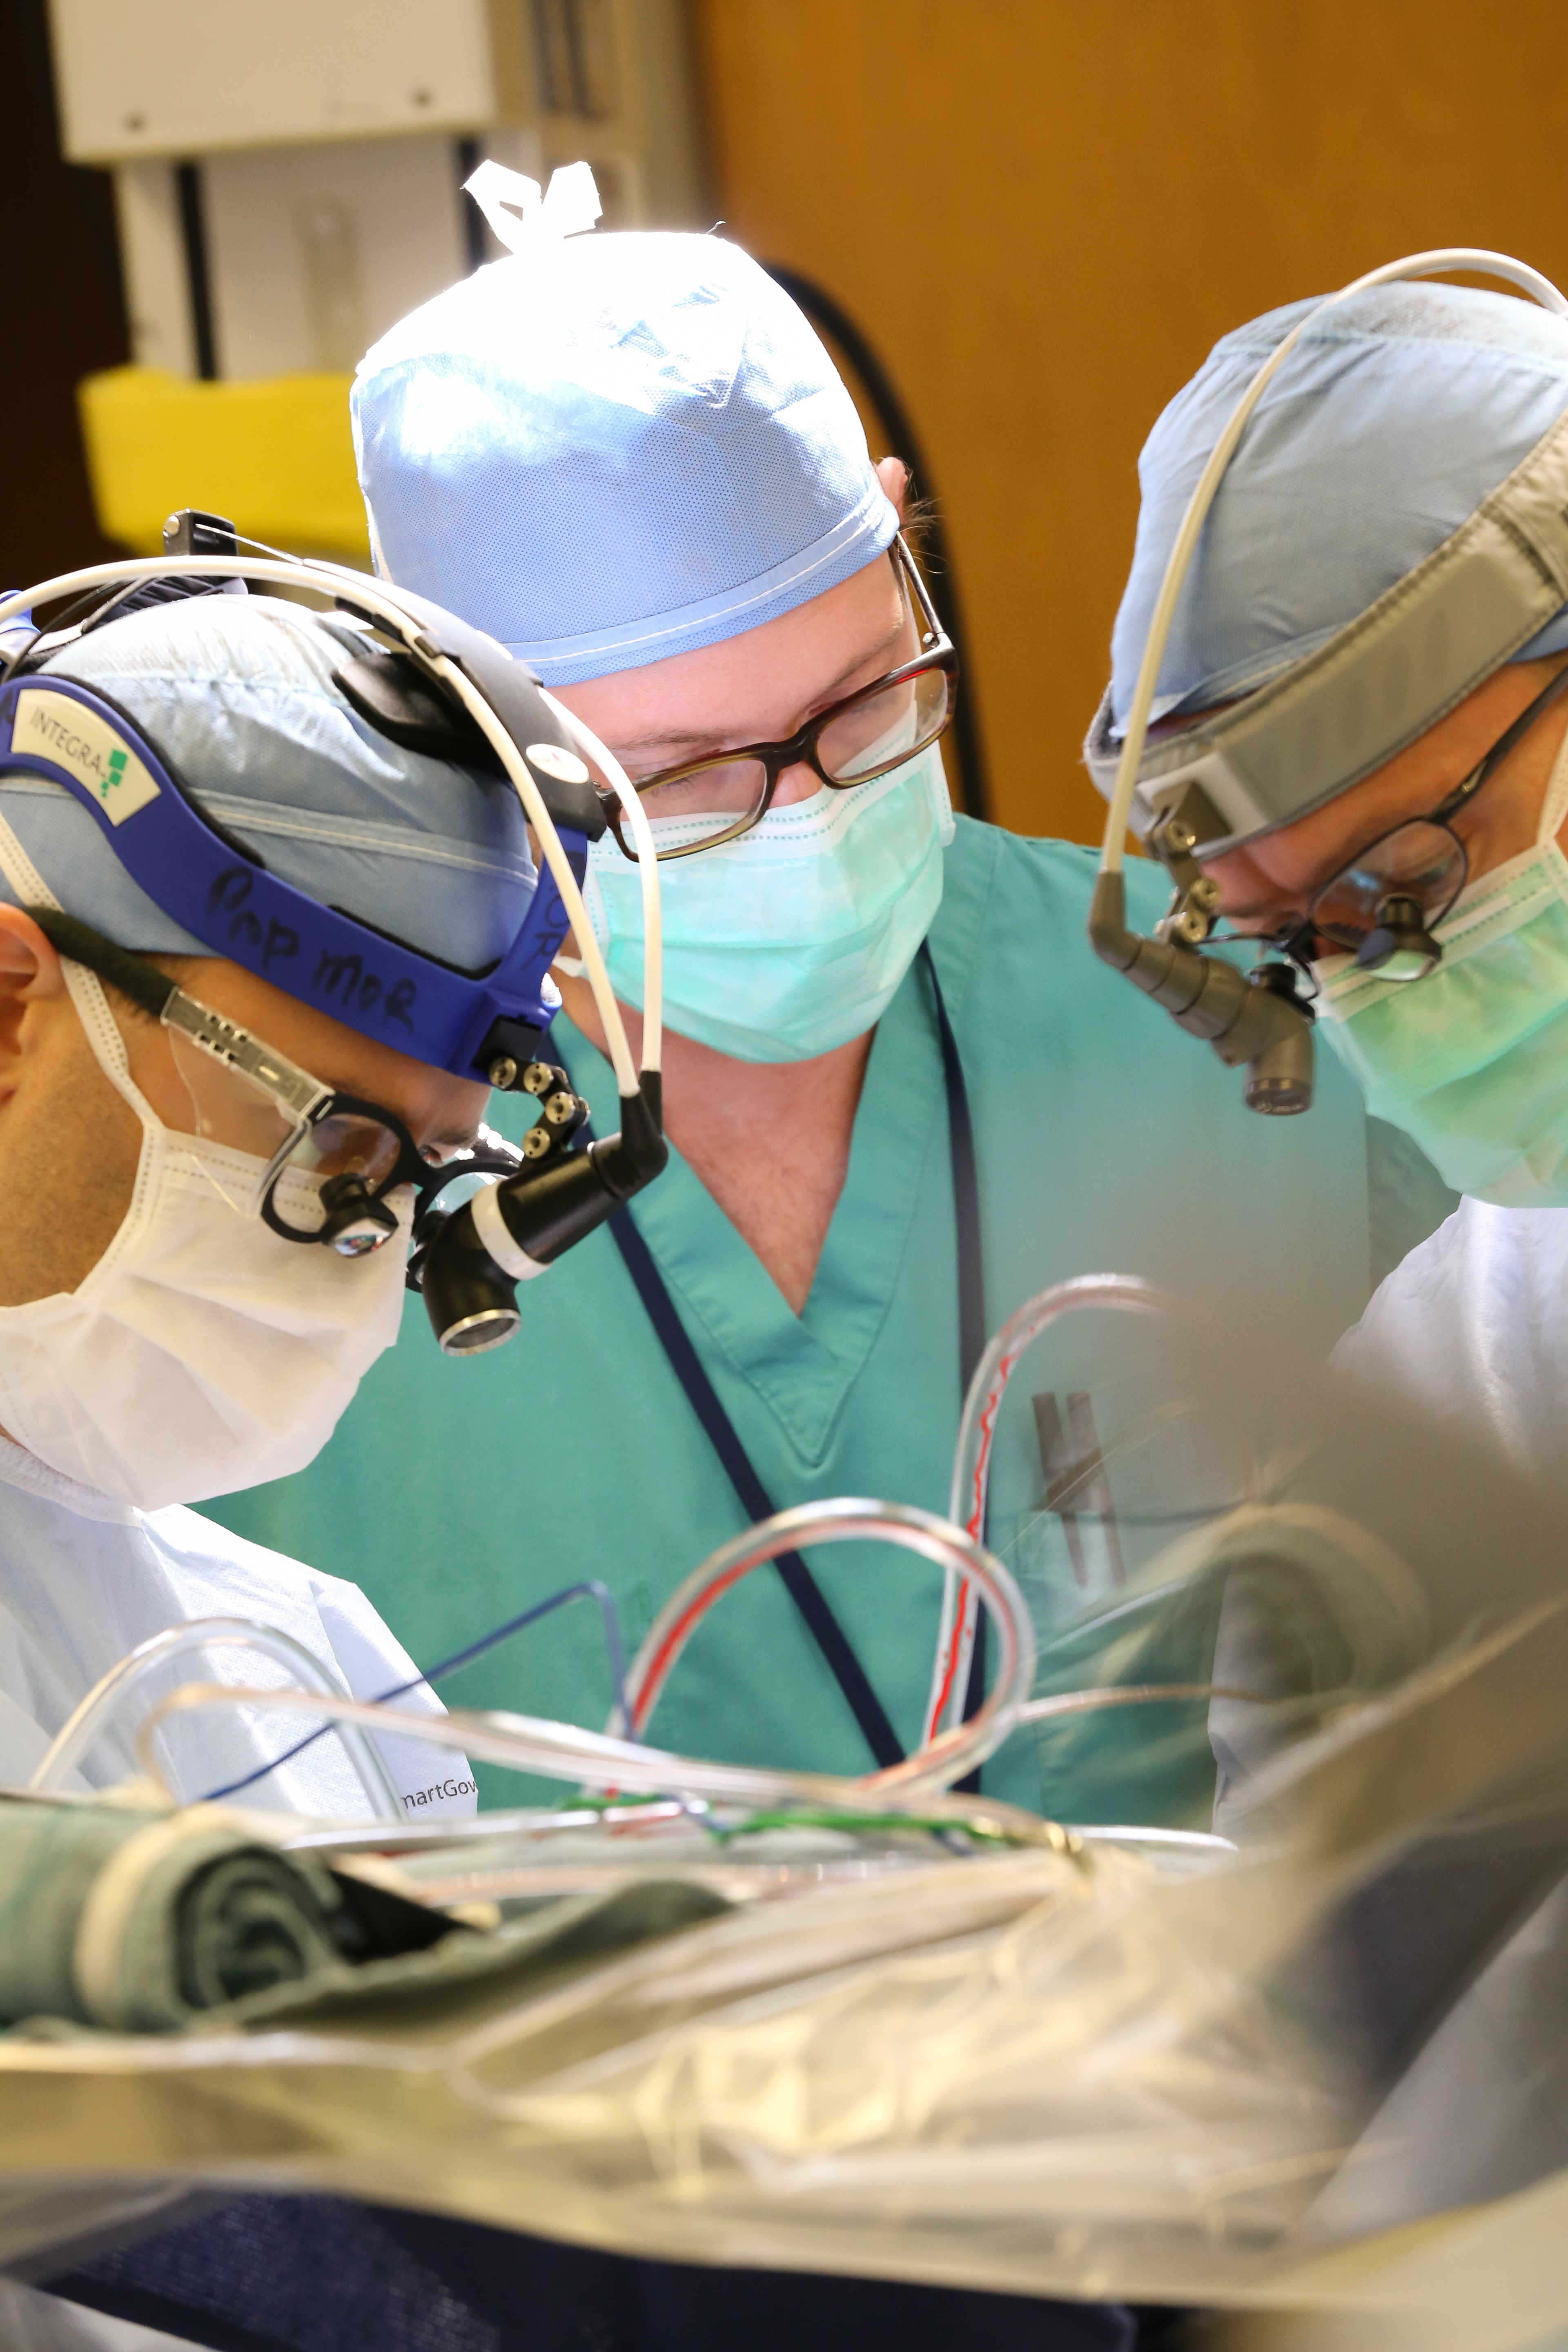 Three male neurosurgeons perform brain surgery. All three are wearing scrubs, surgical caps, surgical masks and glasses. The surgeons on the right and left have head-mounted neurosurgery magnifier loupes. Blood is visible through plastic tubing connected to a patient who is lying on the table. The patient is covered with a plastic sheet.